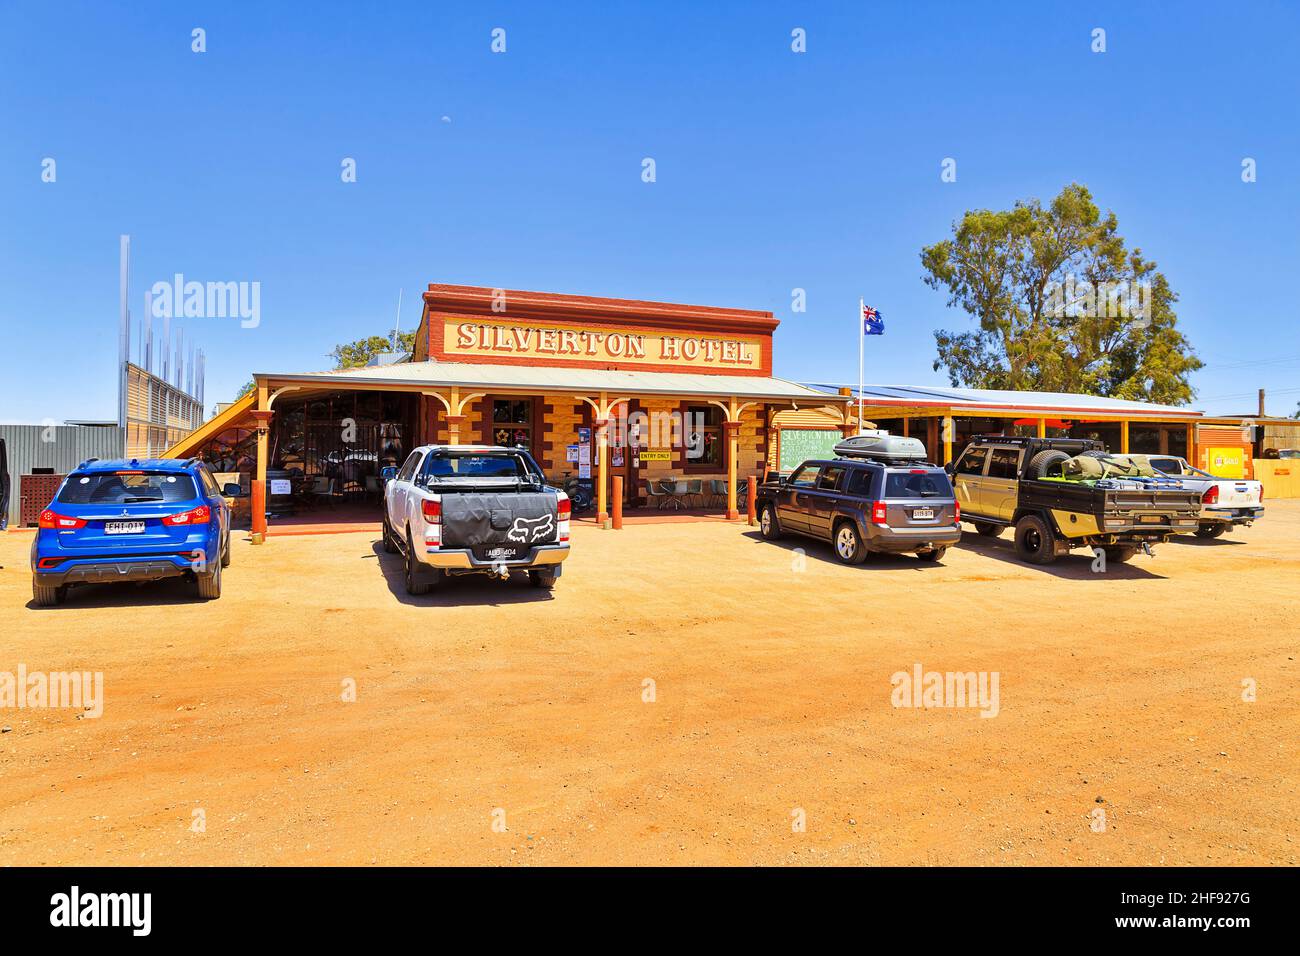 Silverton, Australia - 27 Dec 2021: Historic Silverton hotel pub and accommodation service place in ghost town of Australian outback. Stock Photo